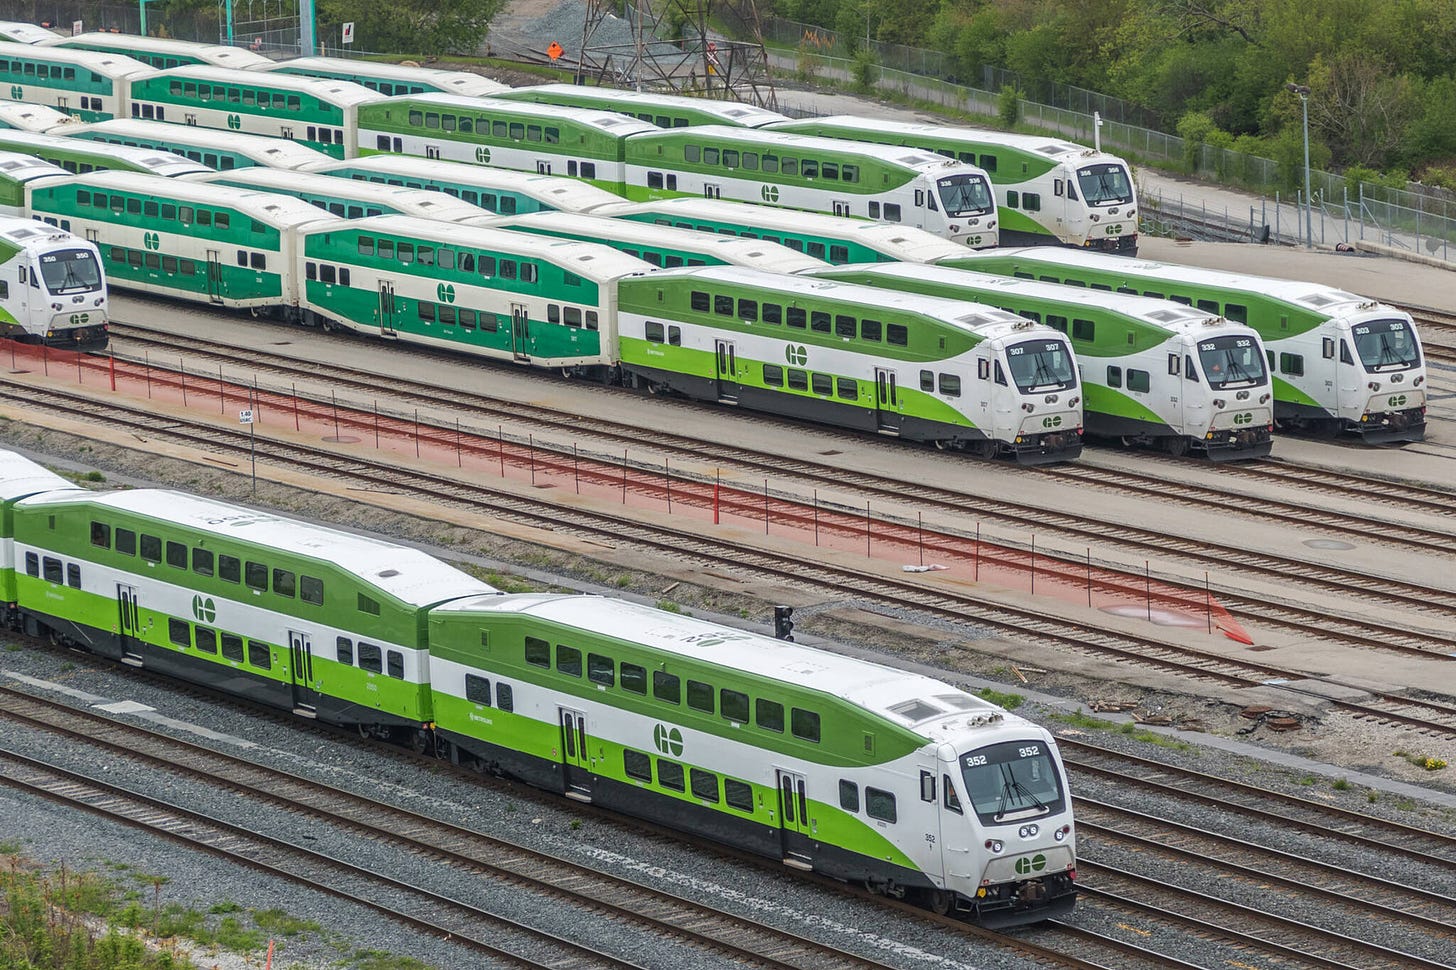 Ontario just announced a major GO Transit expansion plan